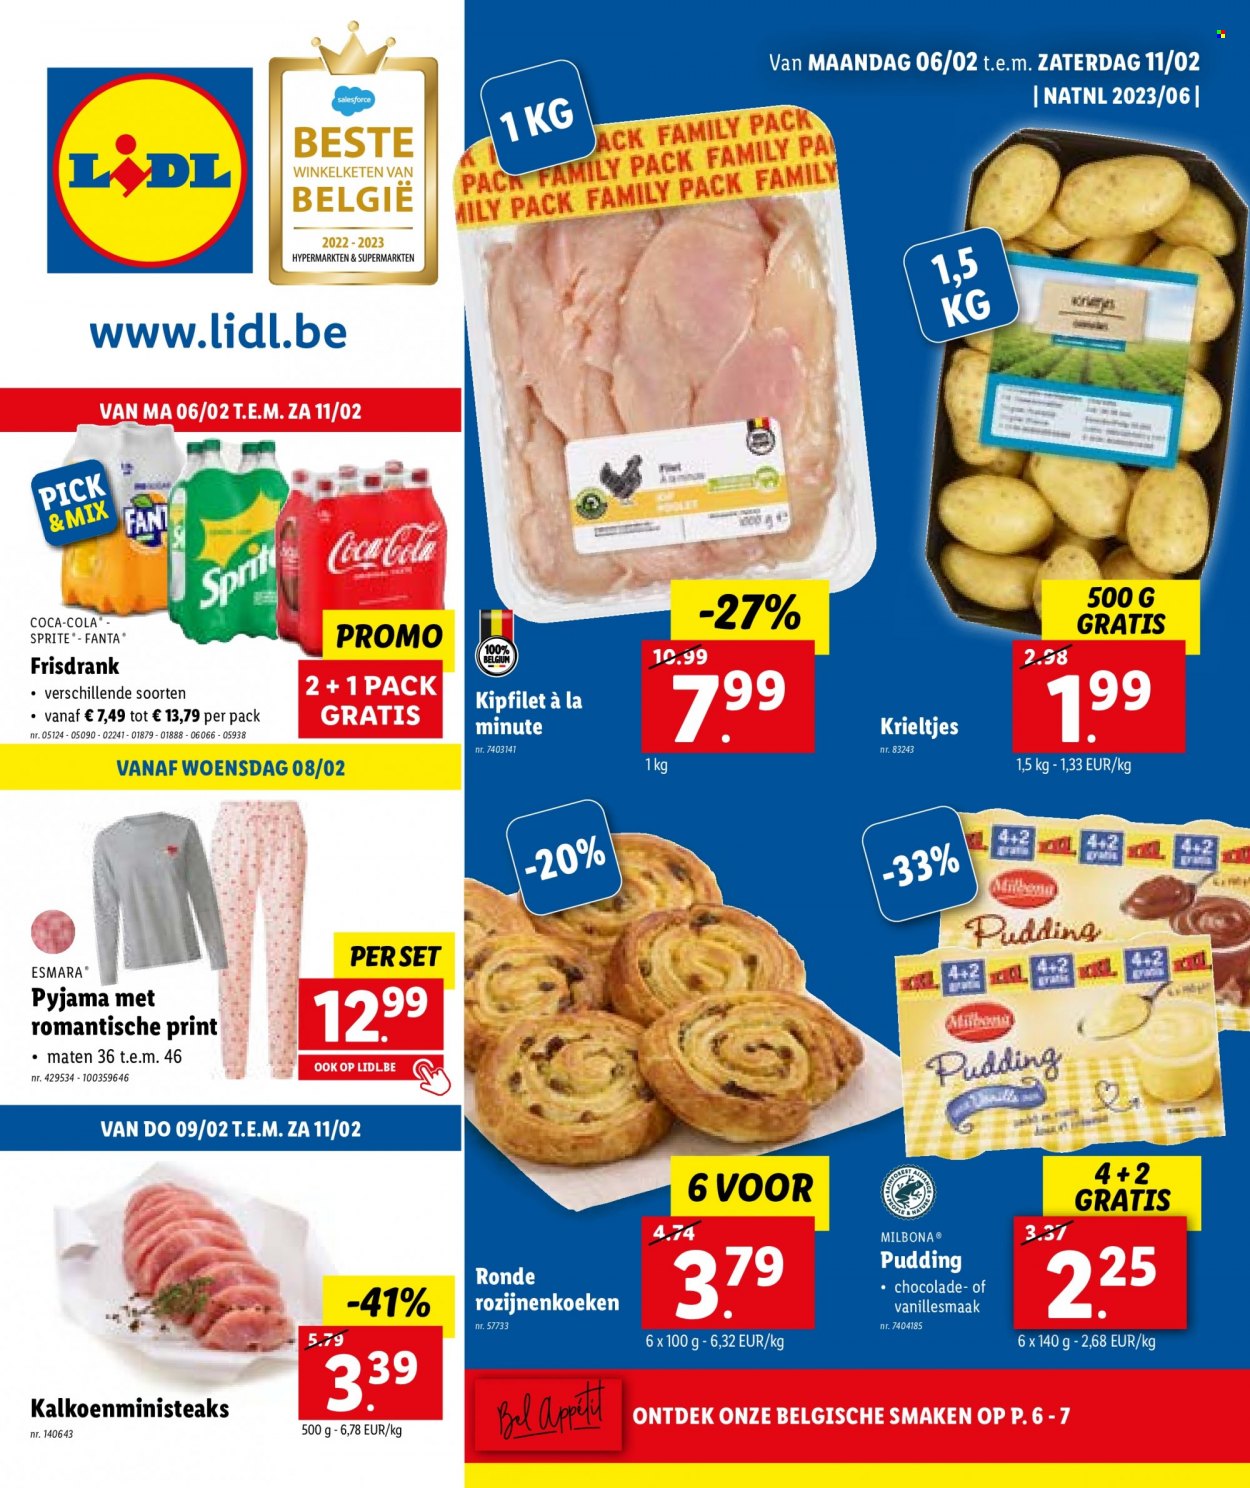 Catalogue Lidl - 6.2.2023 - 11.2.2023. Page 1.